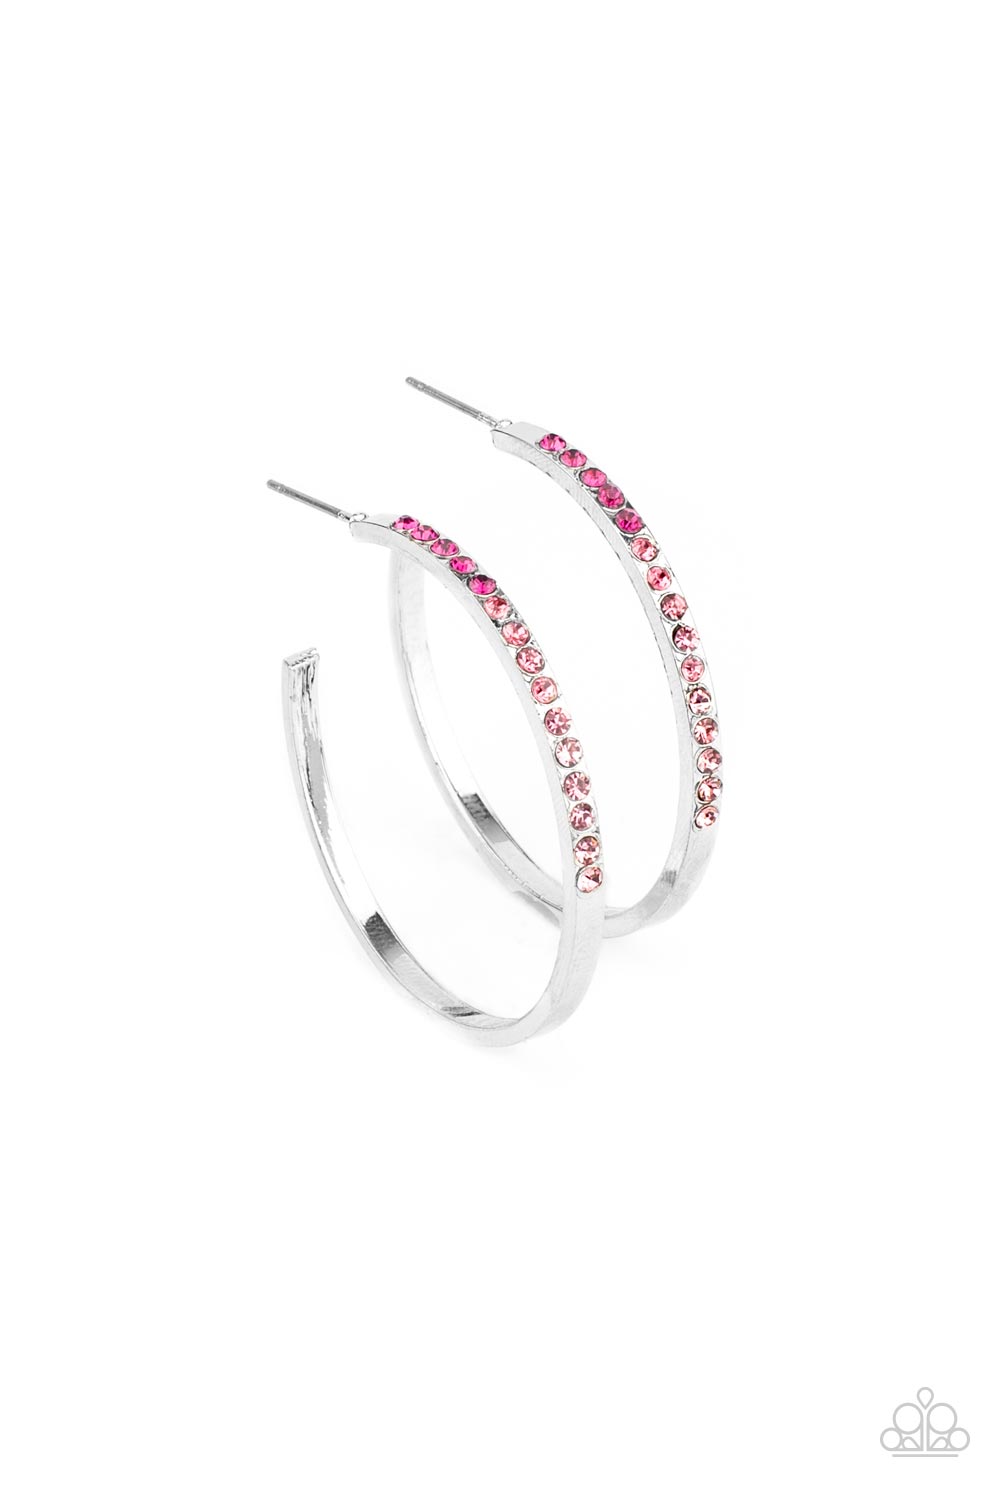 Somewhere Over the OMBRE Pink Hoop Earring - Paparazzi Accessories  The front half of a dainty silver hoop is encrusted in an ombre of pink rhinestones, creating a sparkly spectrum of color. Earring attaches to a standard post fitting. Hoop measures approximately 1 1/2" in diameter.  Sold as one pair of hoop earrings.